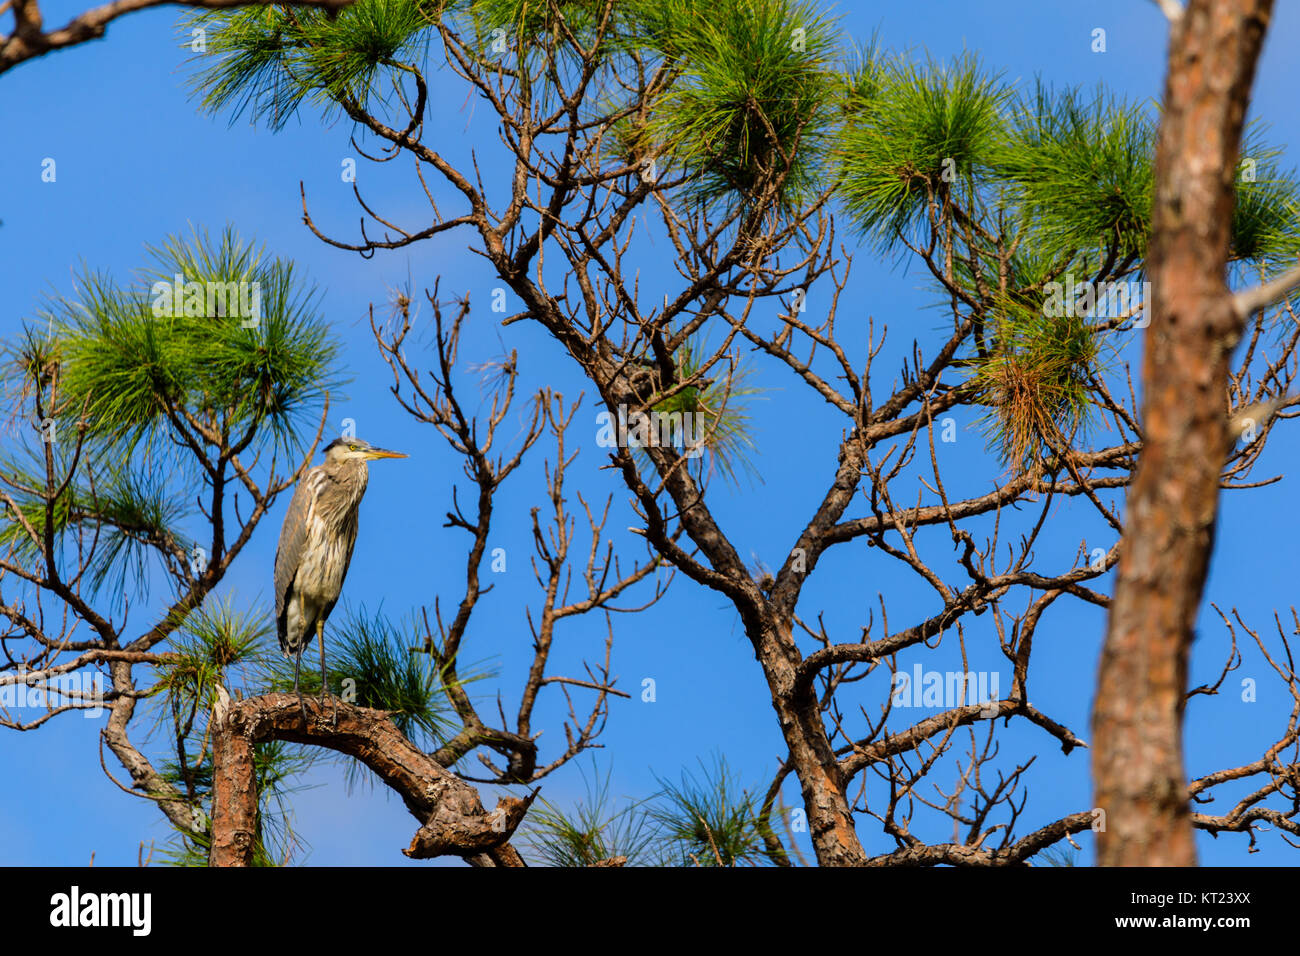 A Great Blue Heron sits in a tree near the swamp at Everglades National Park, Florida, November 2017 Stock Photo